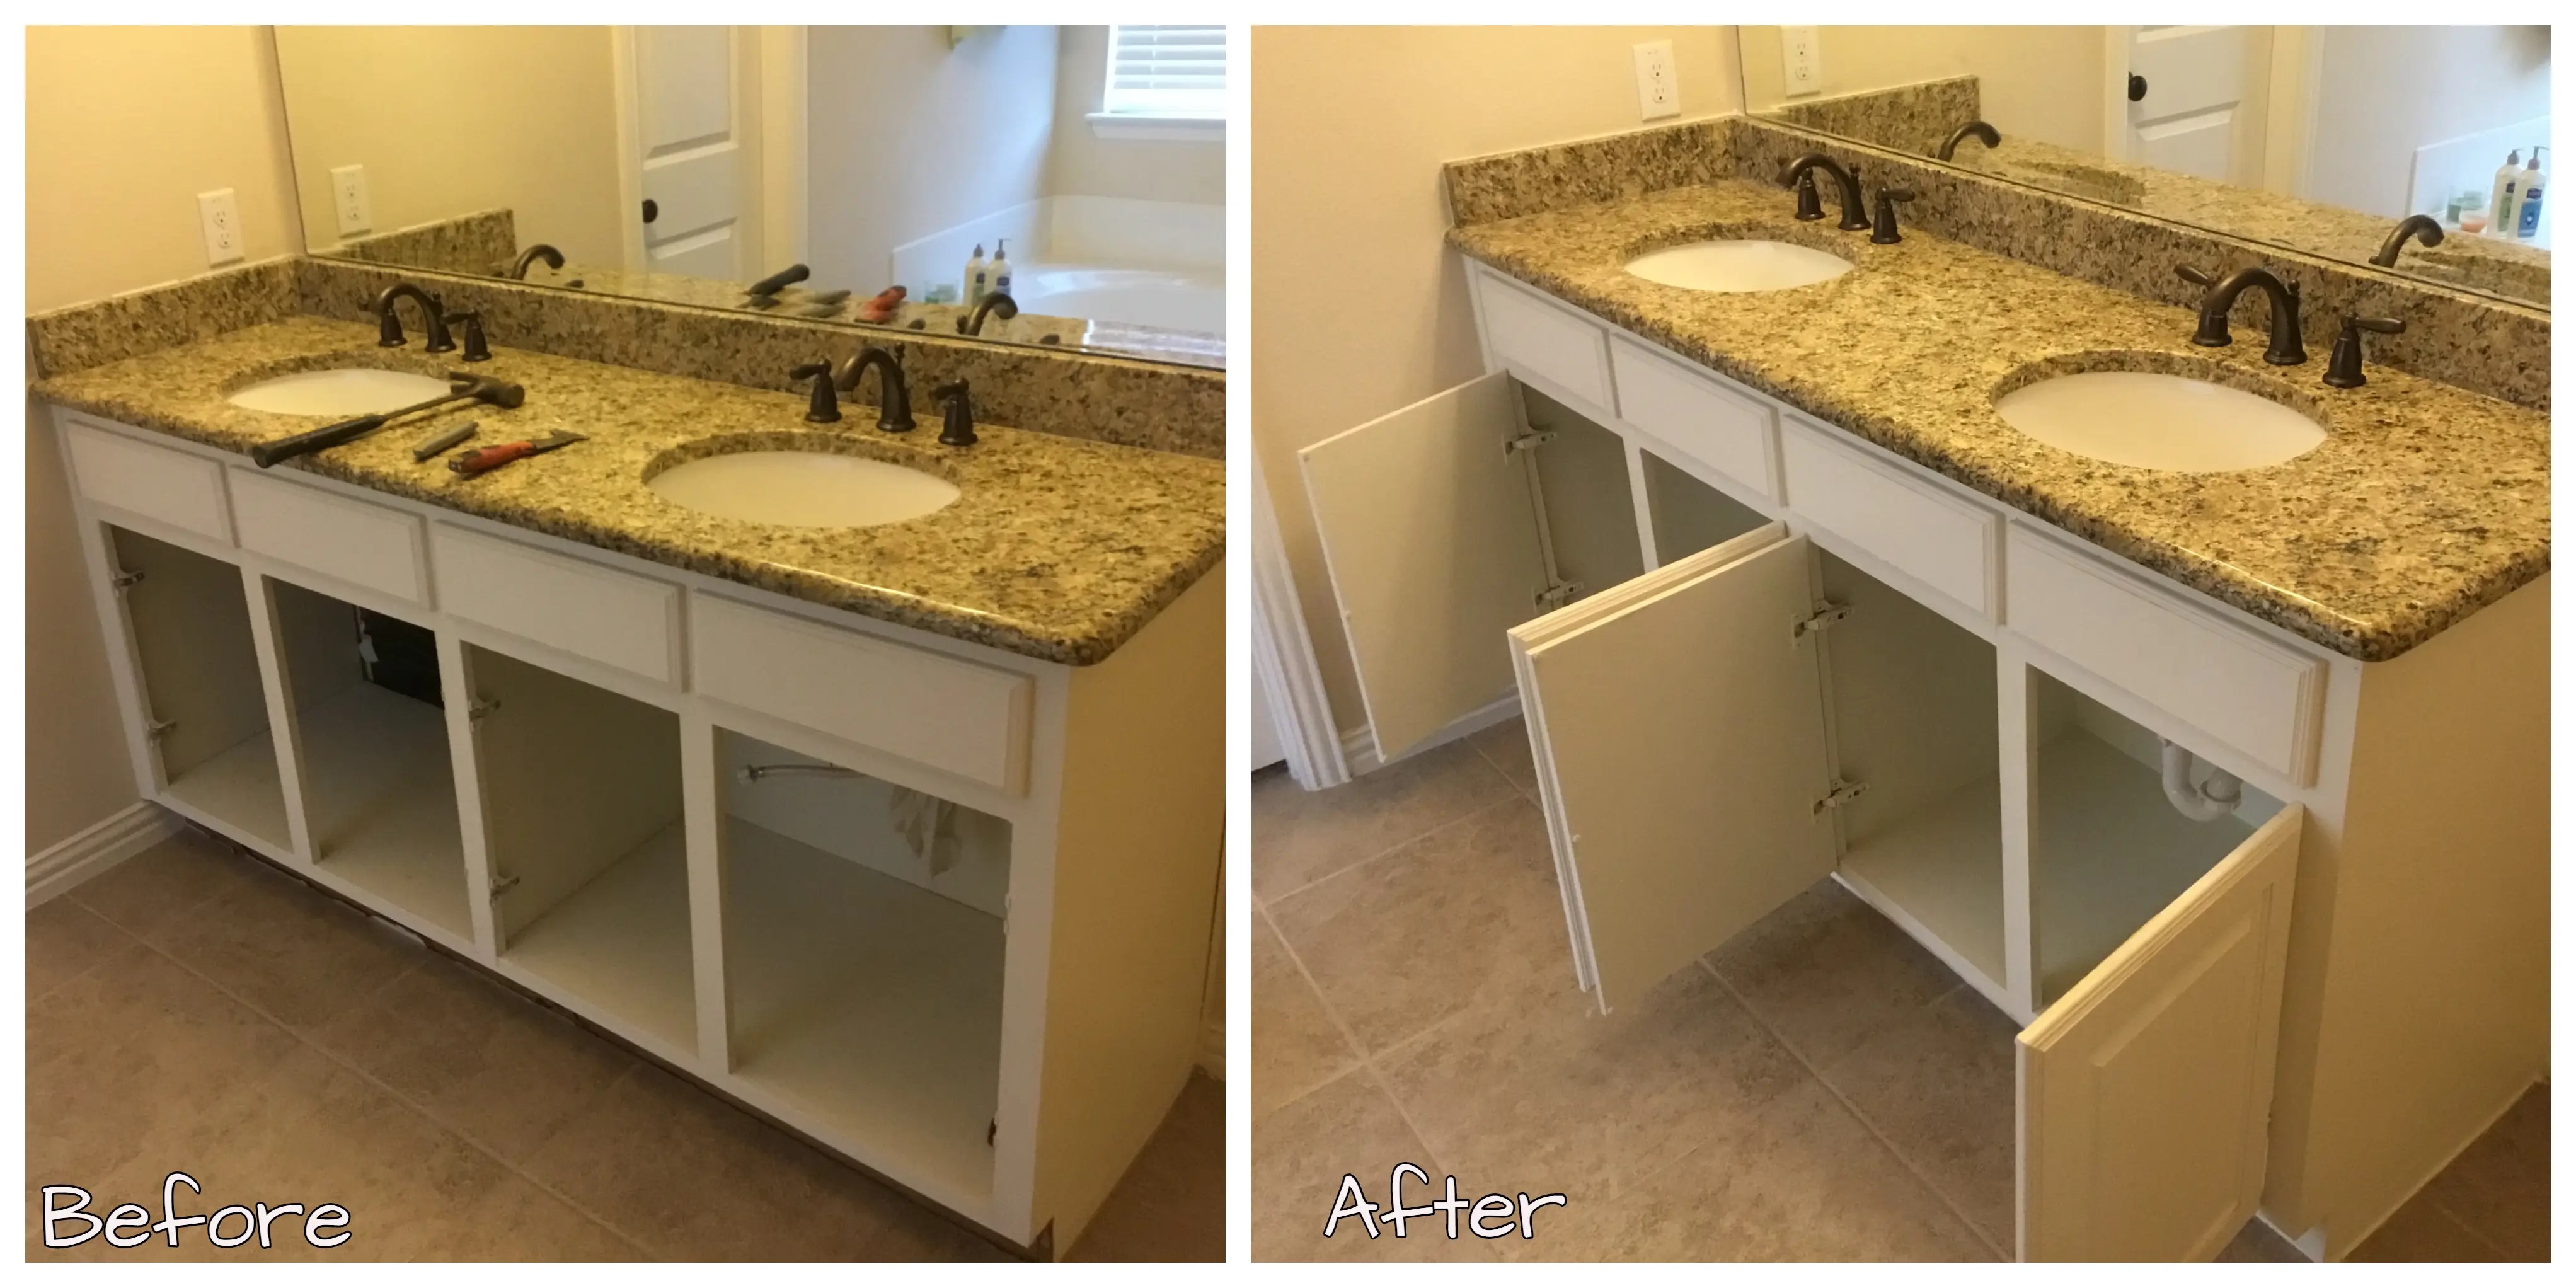 Cabinets under a bathroom vanity before and after the cabinet doors have been replaced by Mr. Handyman.